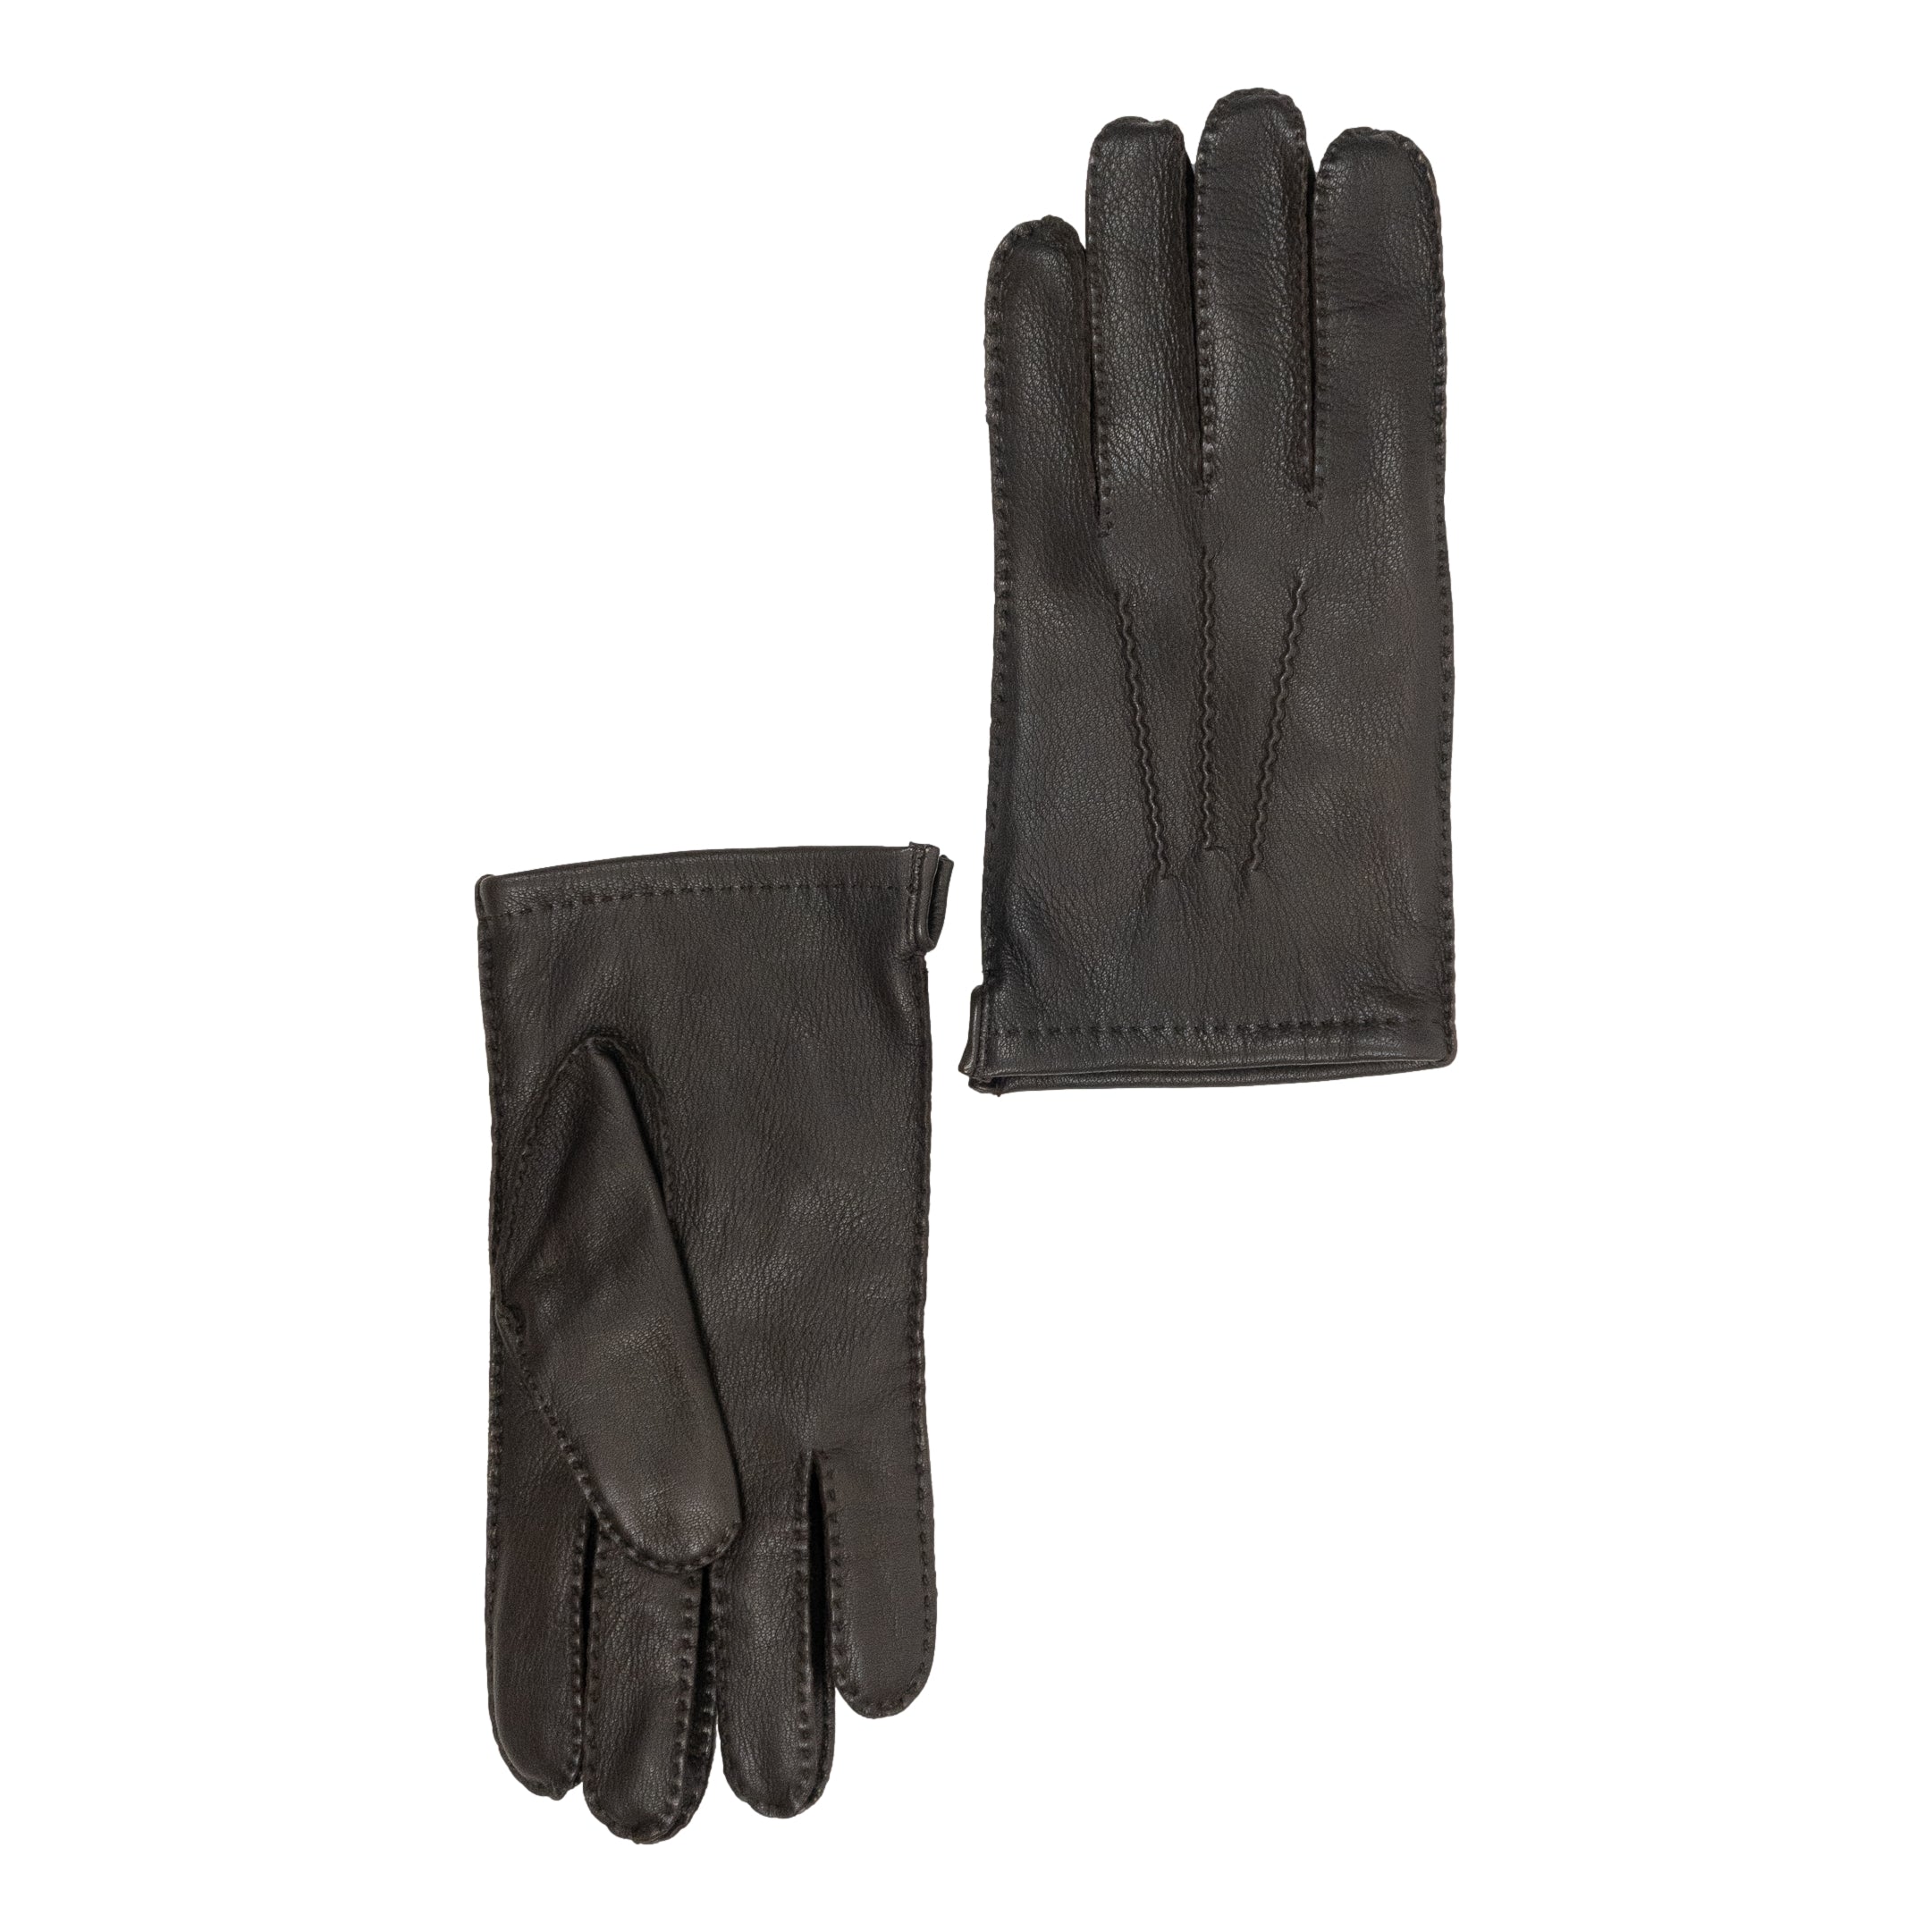 Men's Handsewn Deerskin Gloves with Cashmere Lining and Side Vent